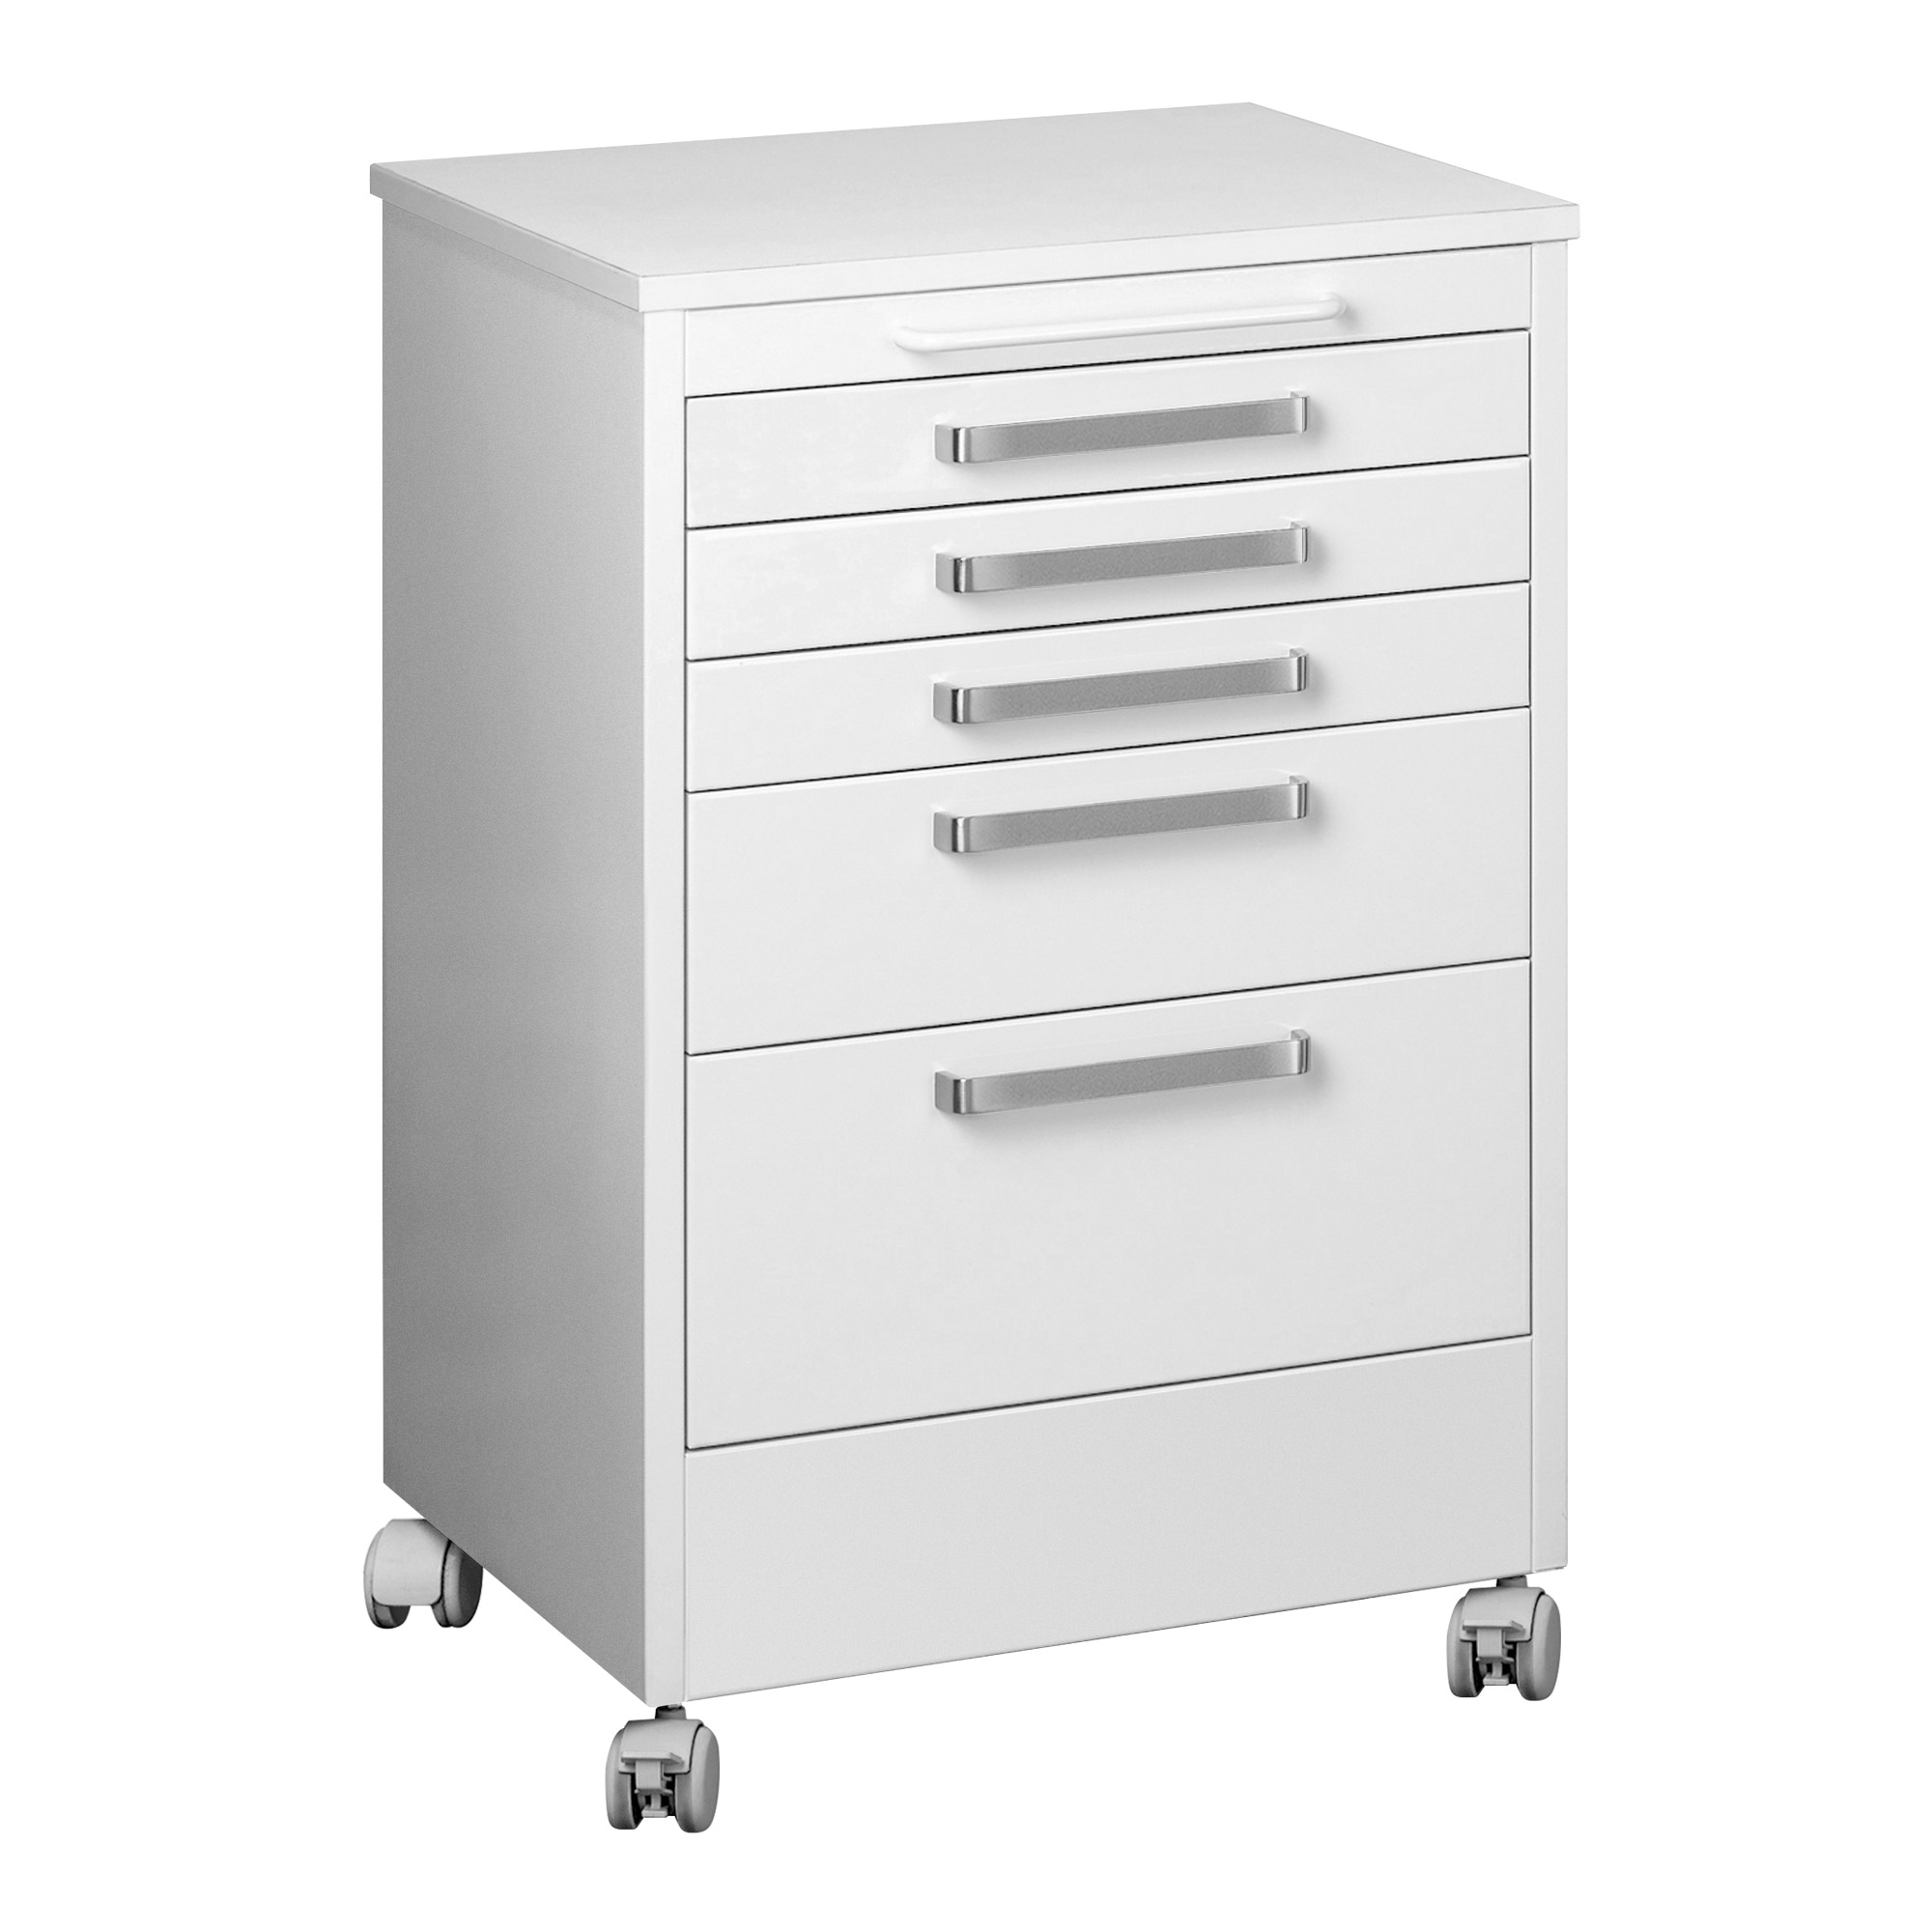 Unit on castors with 5 drawers